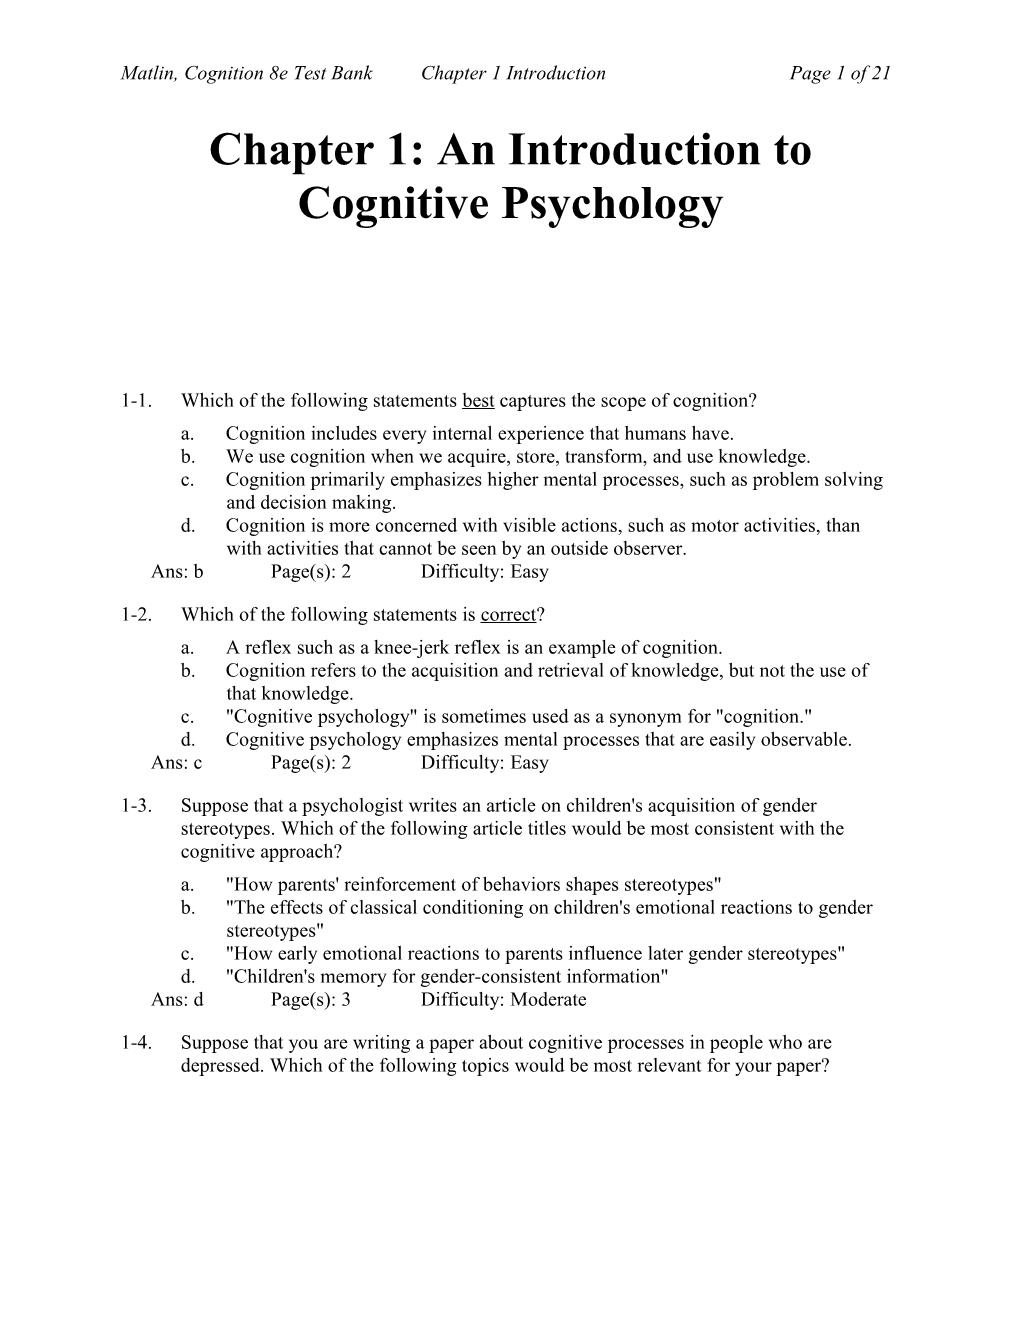 Chapter 1: an Introduction to Cognitive Psychology